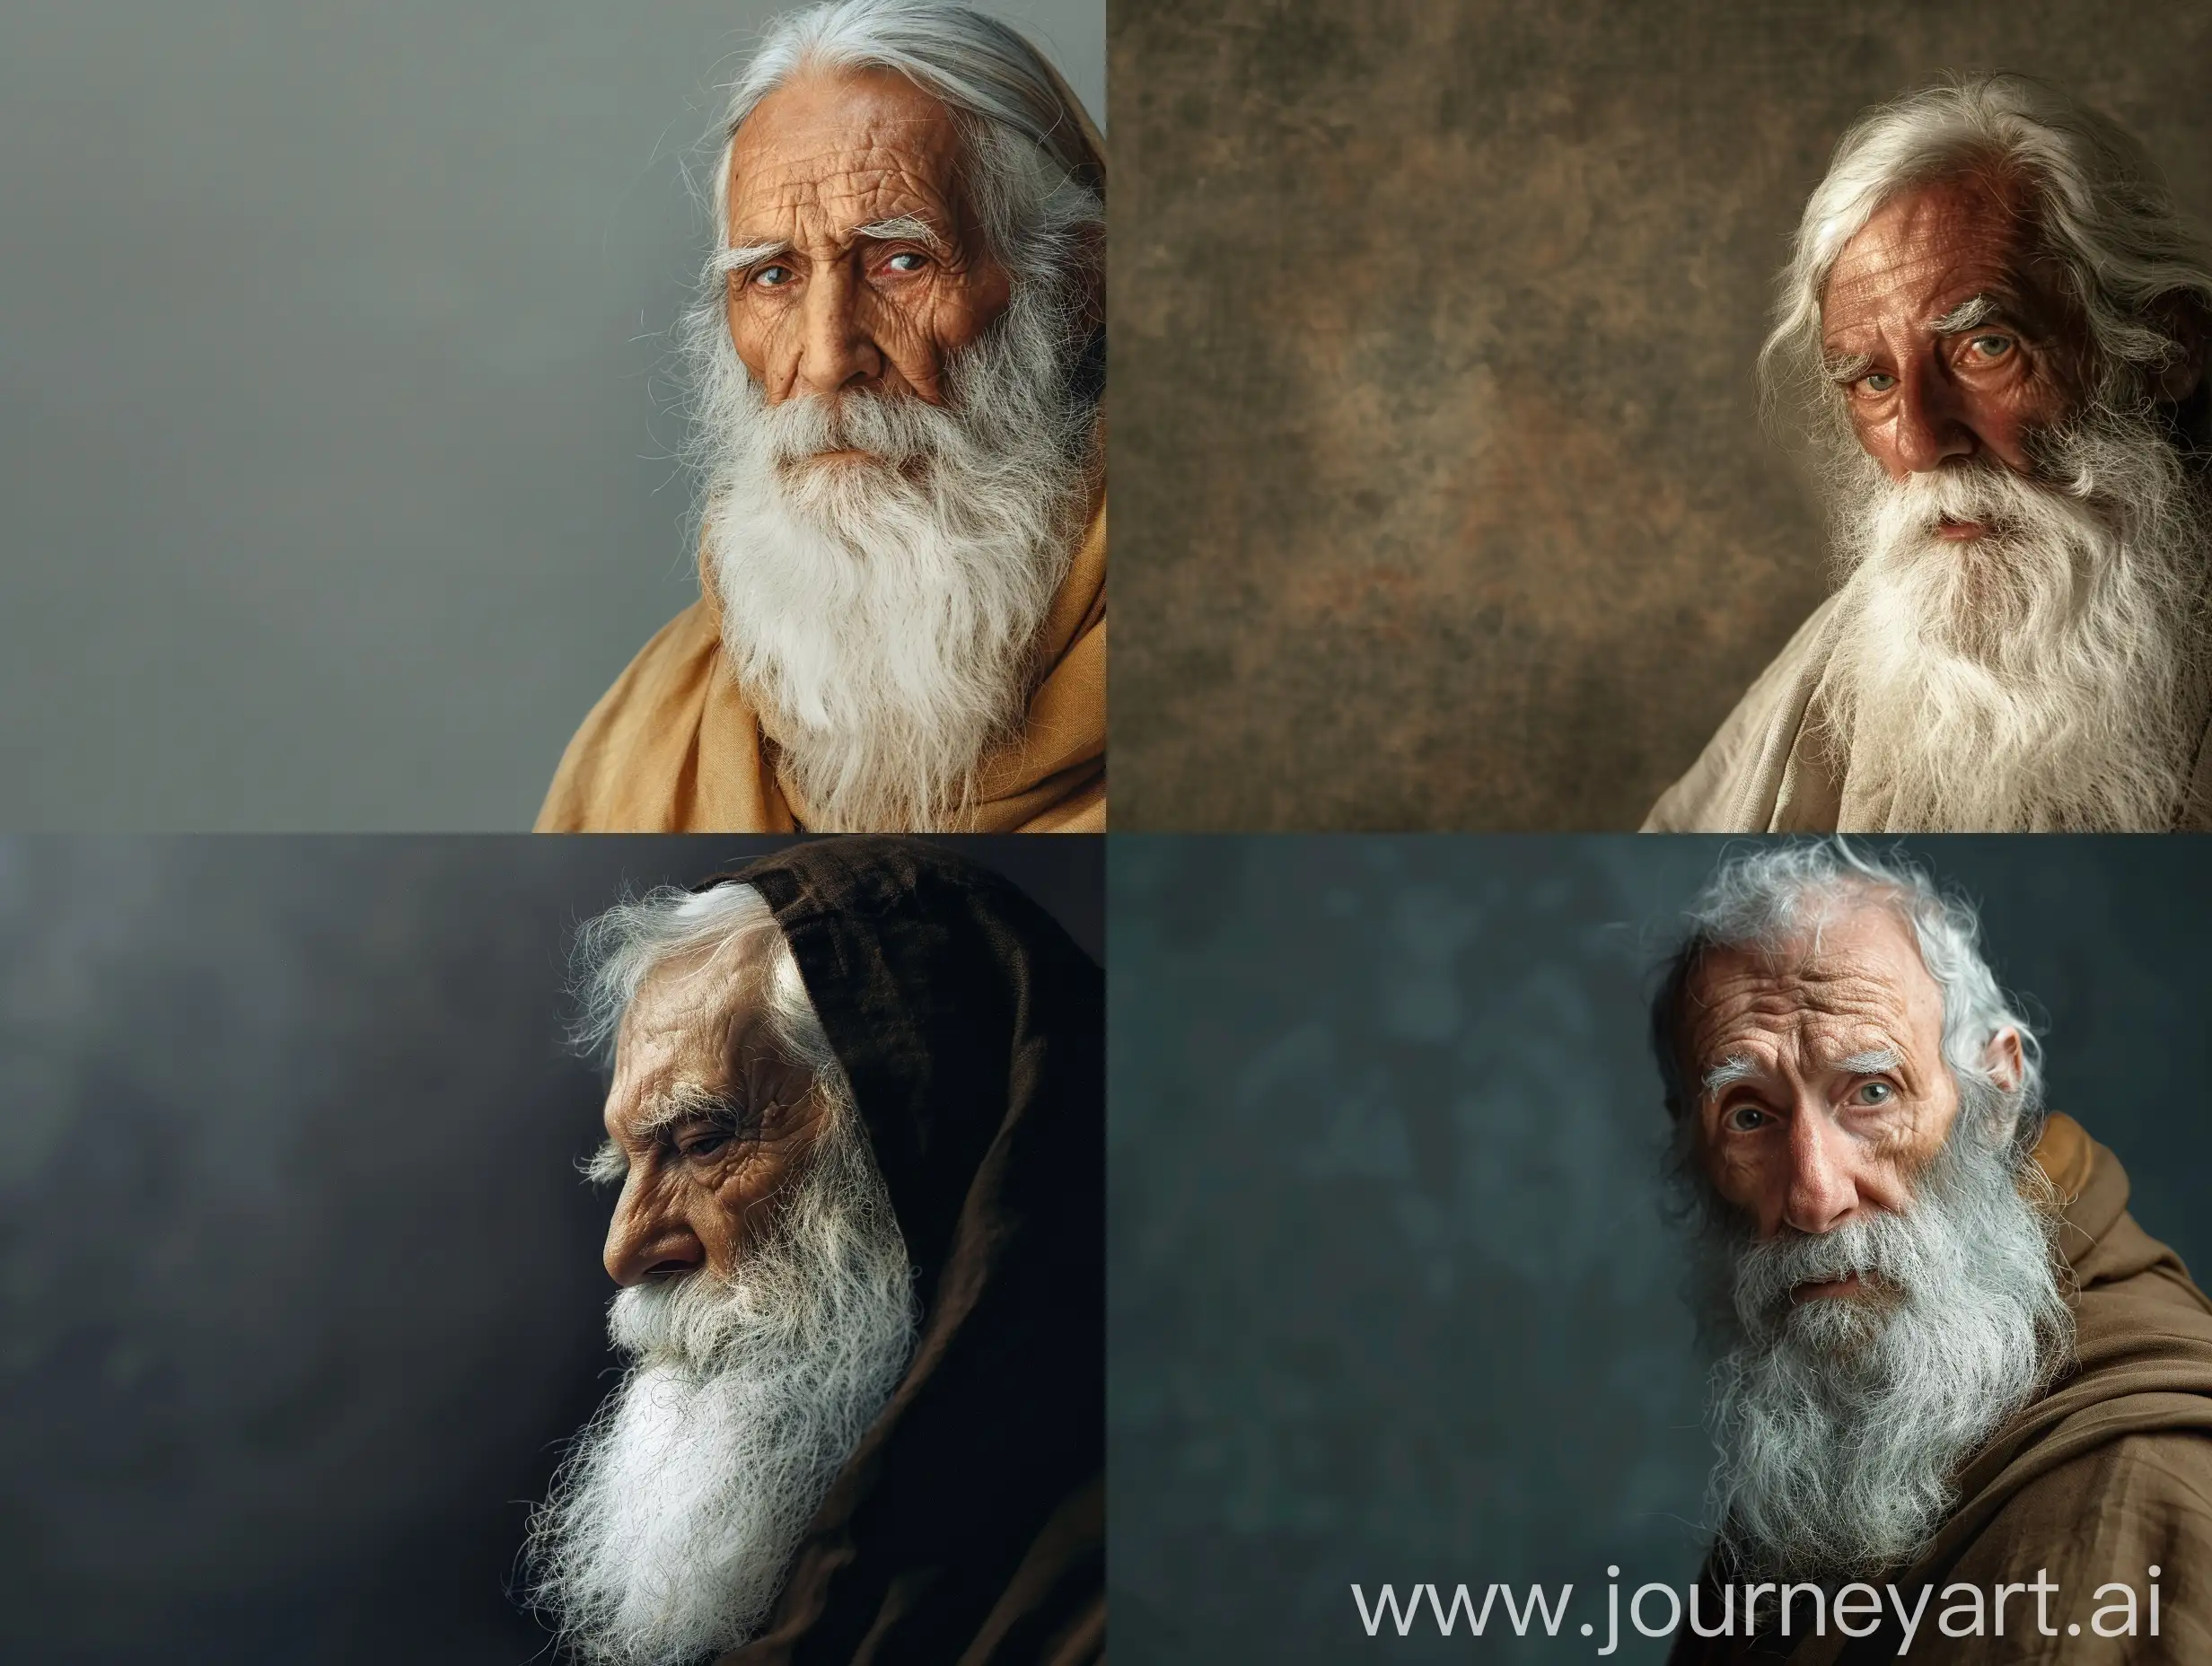 old prophet with white beard, background with space for text, hq, photo real, the old prophet is at right side of the image